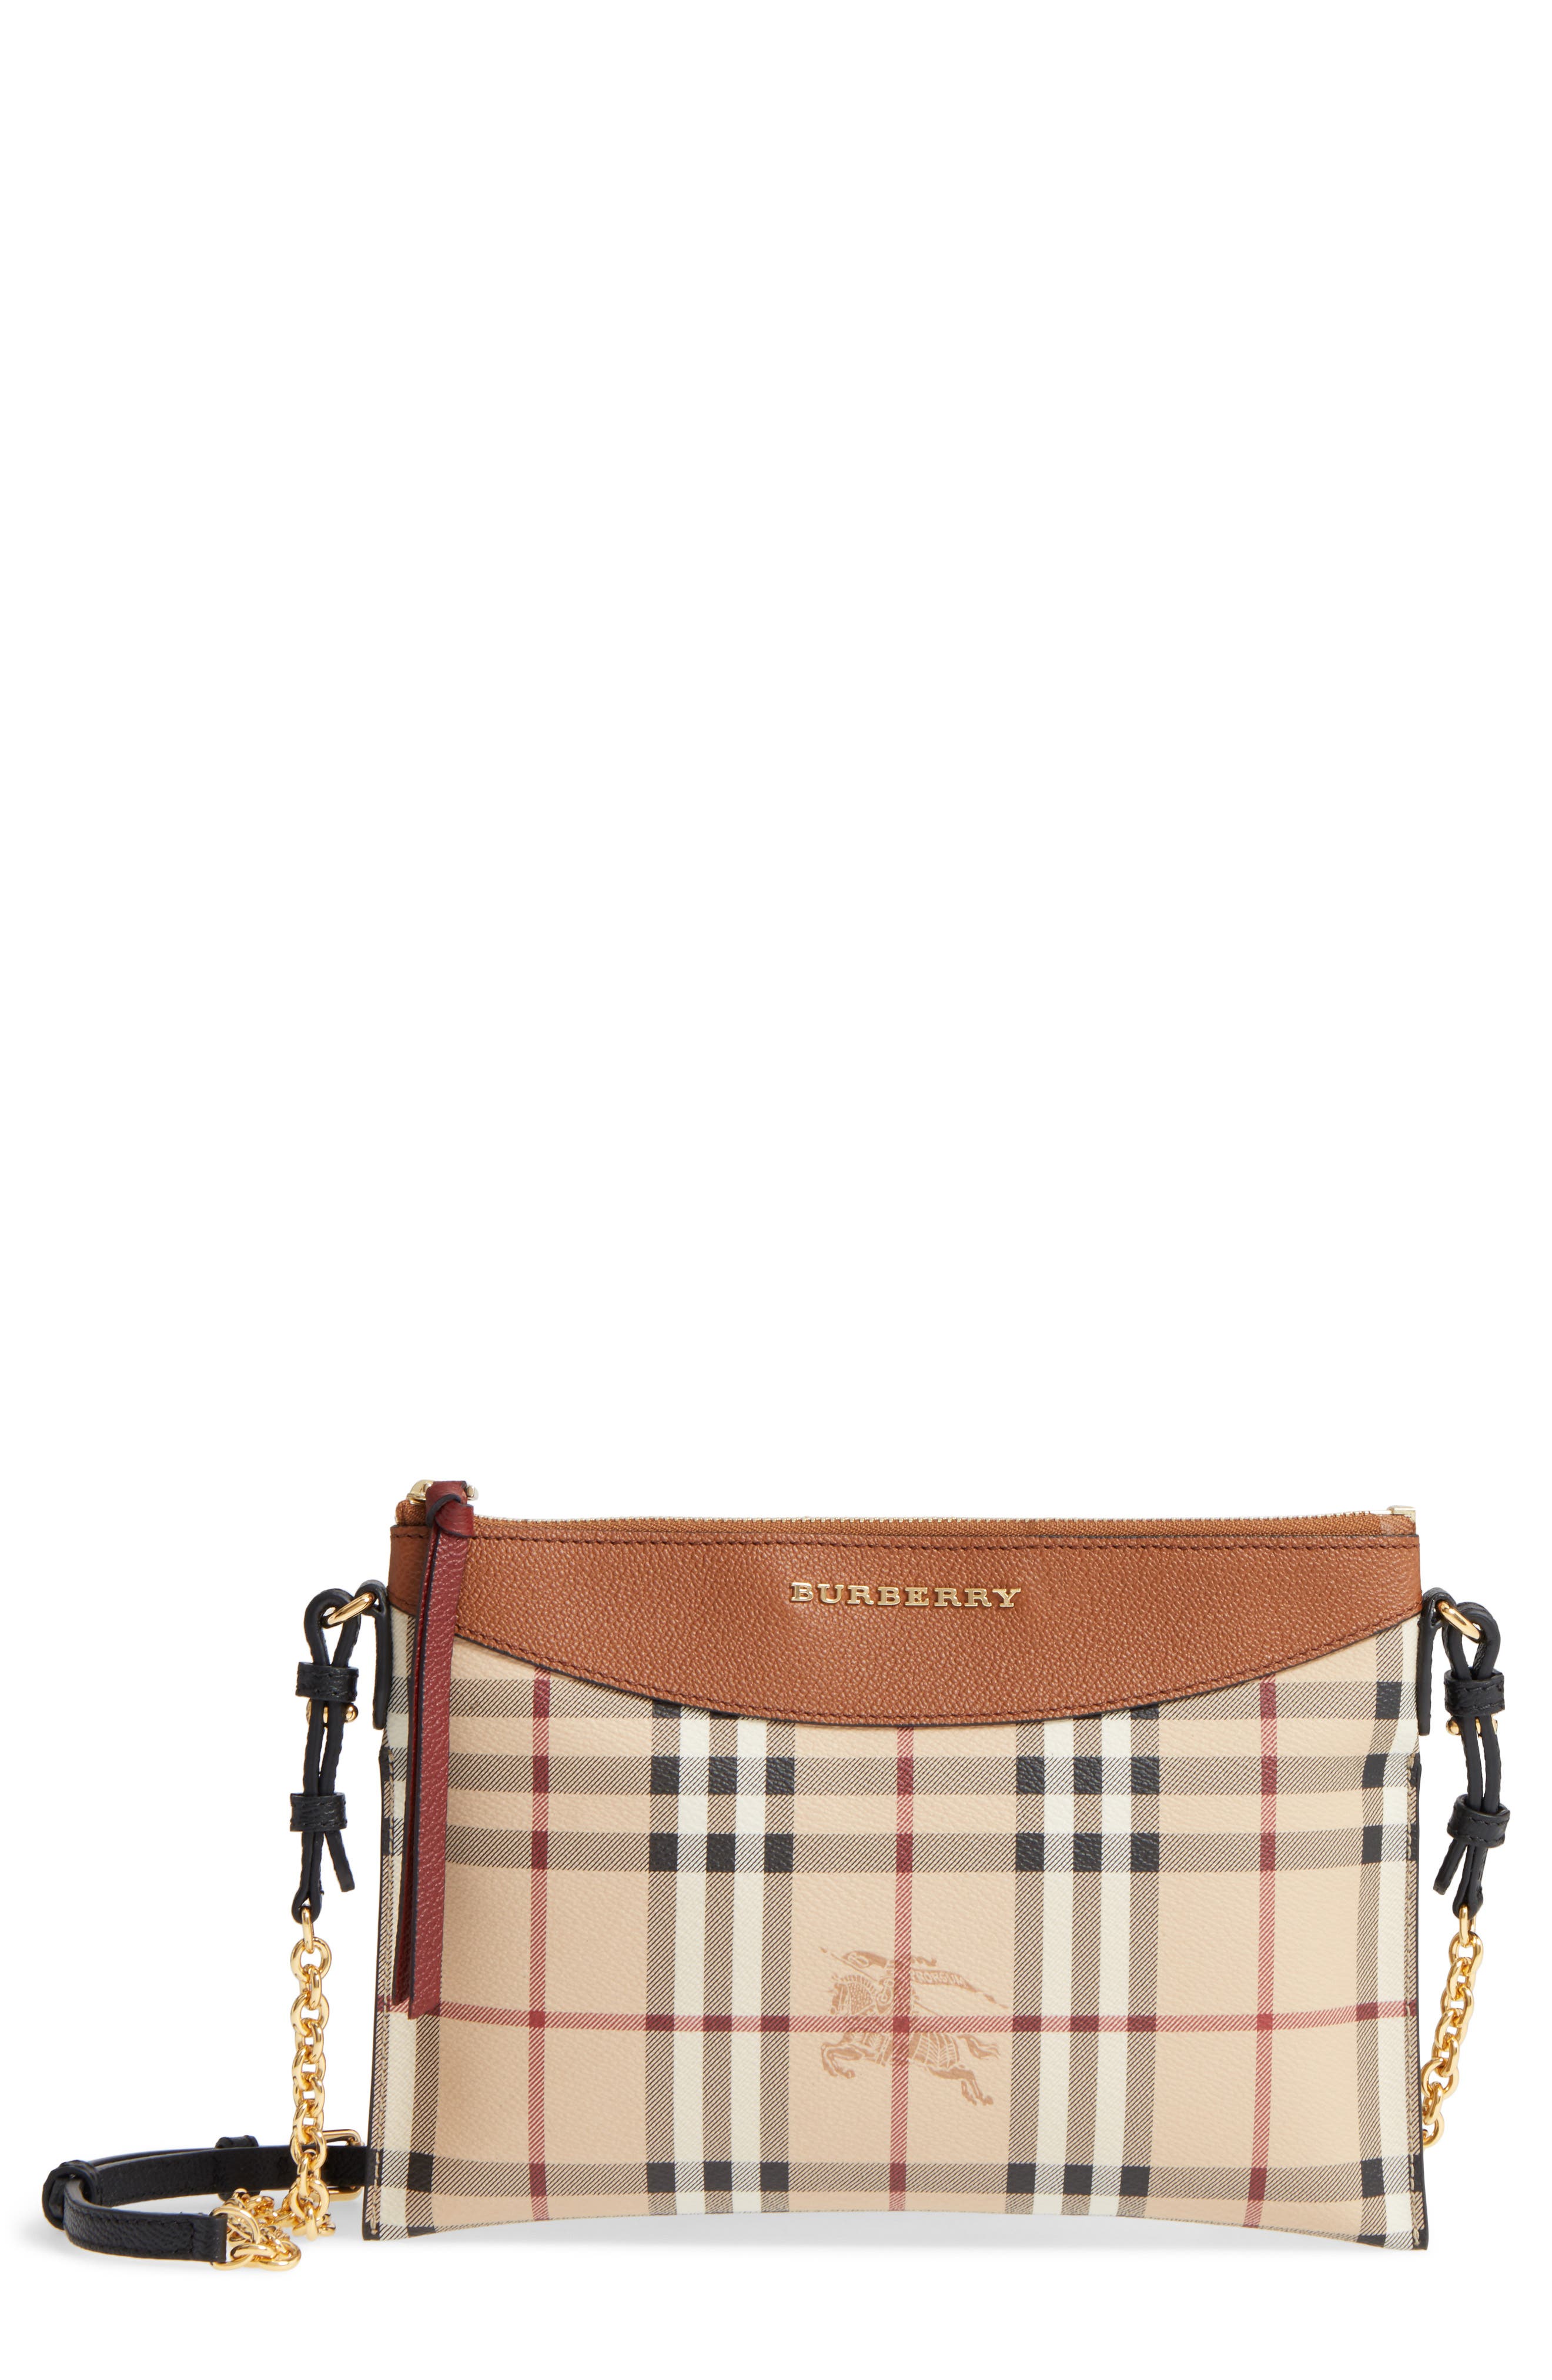 burberry totes nordstrom